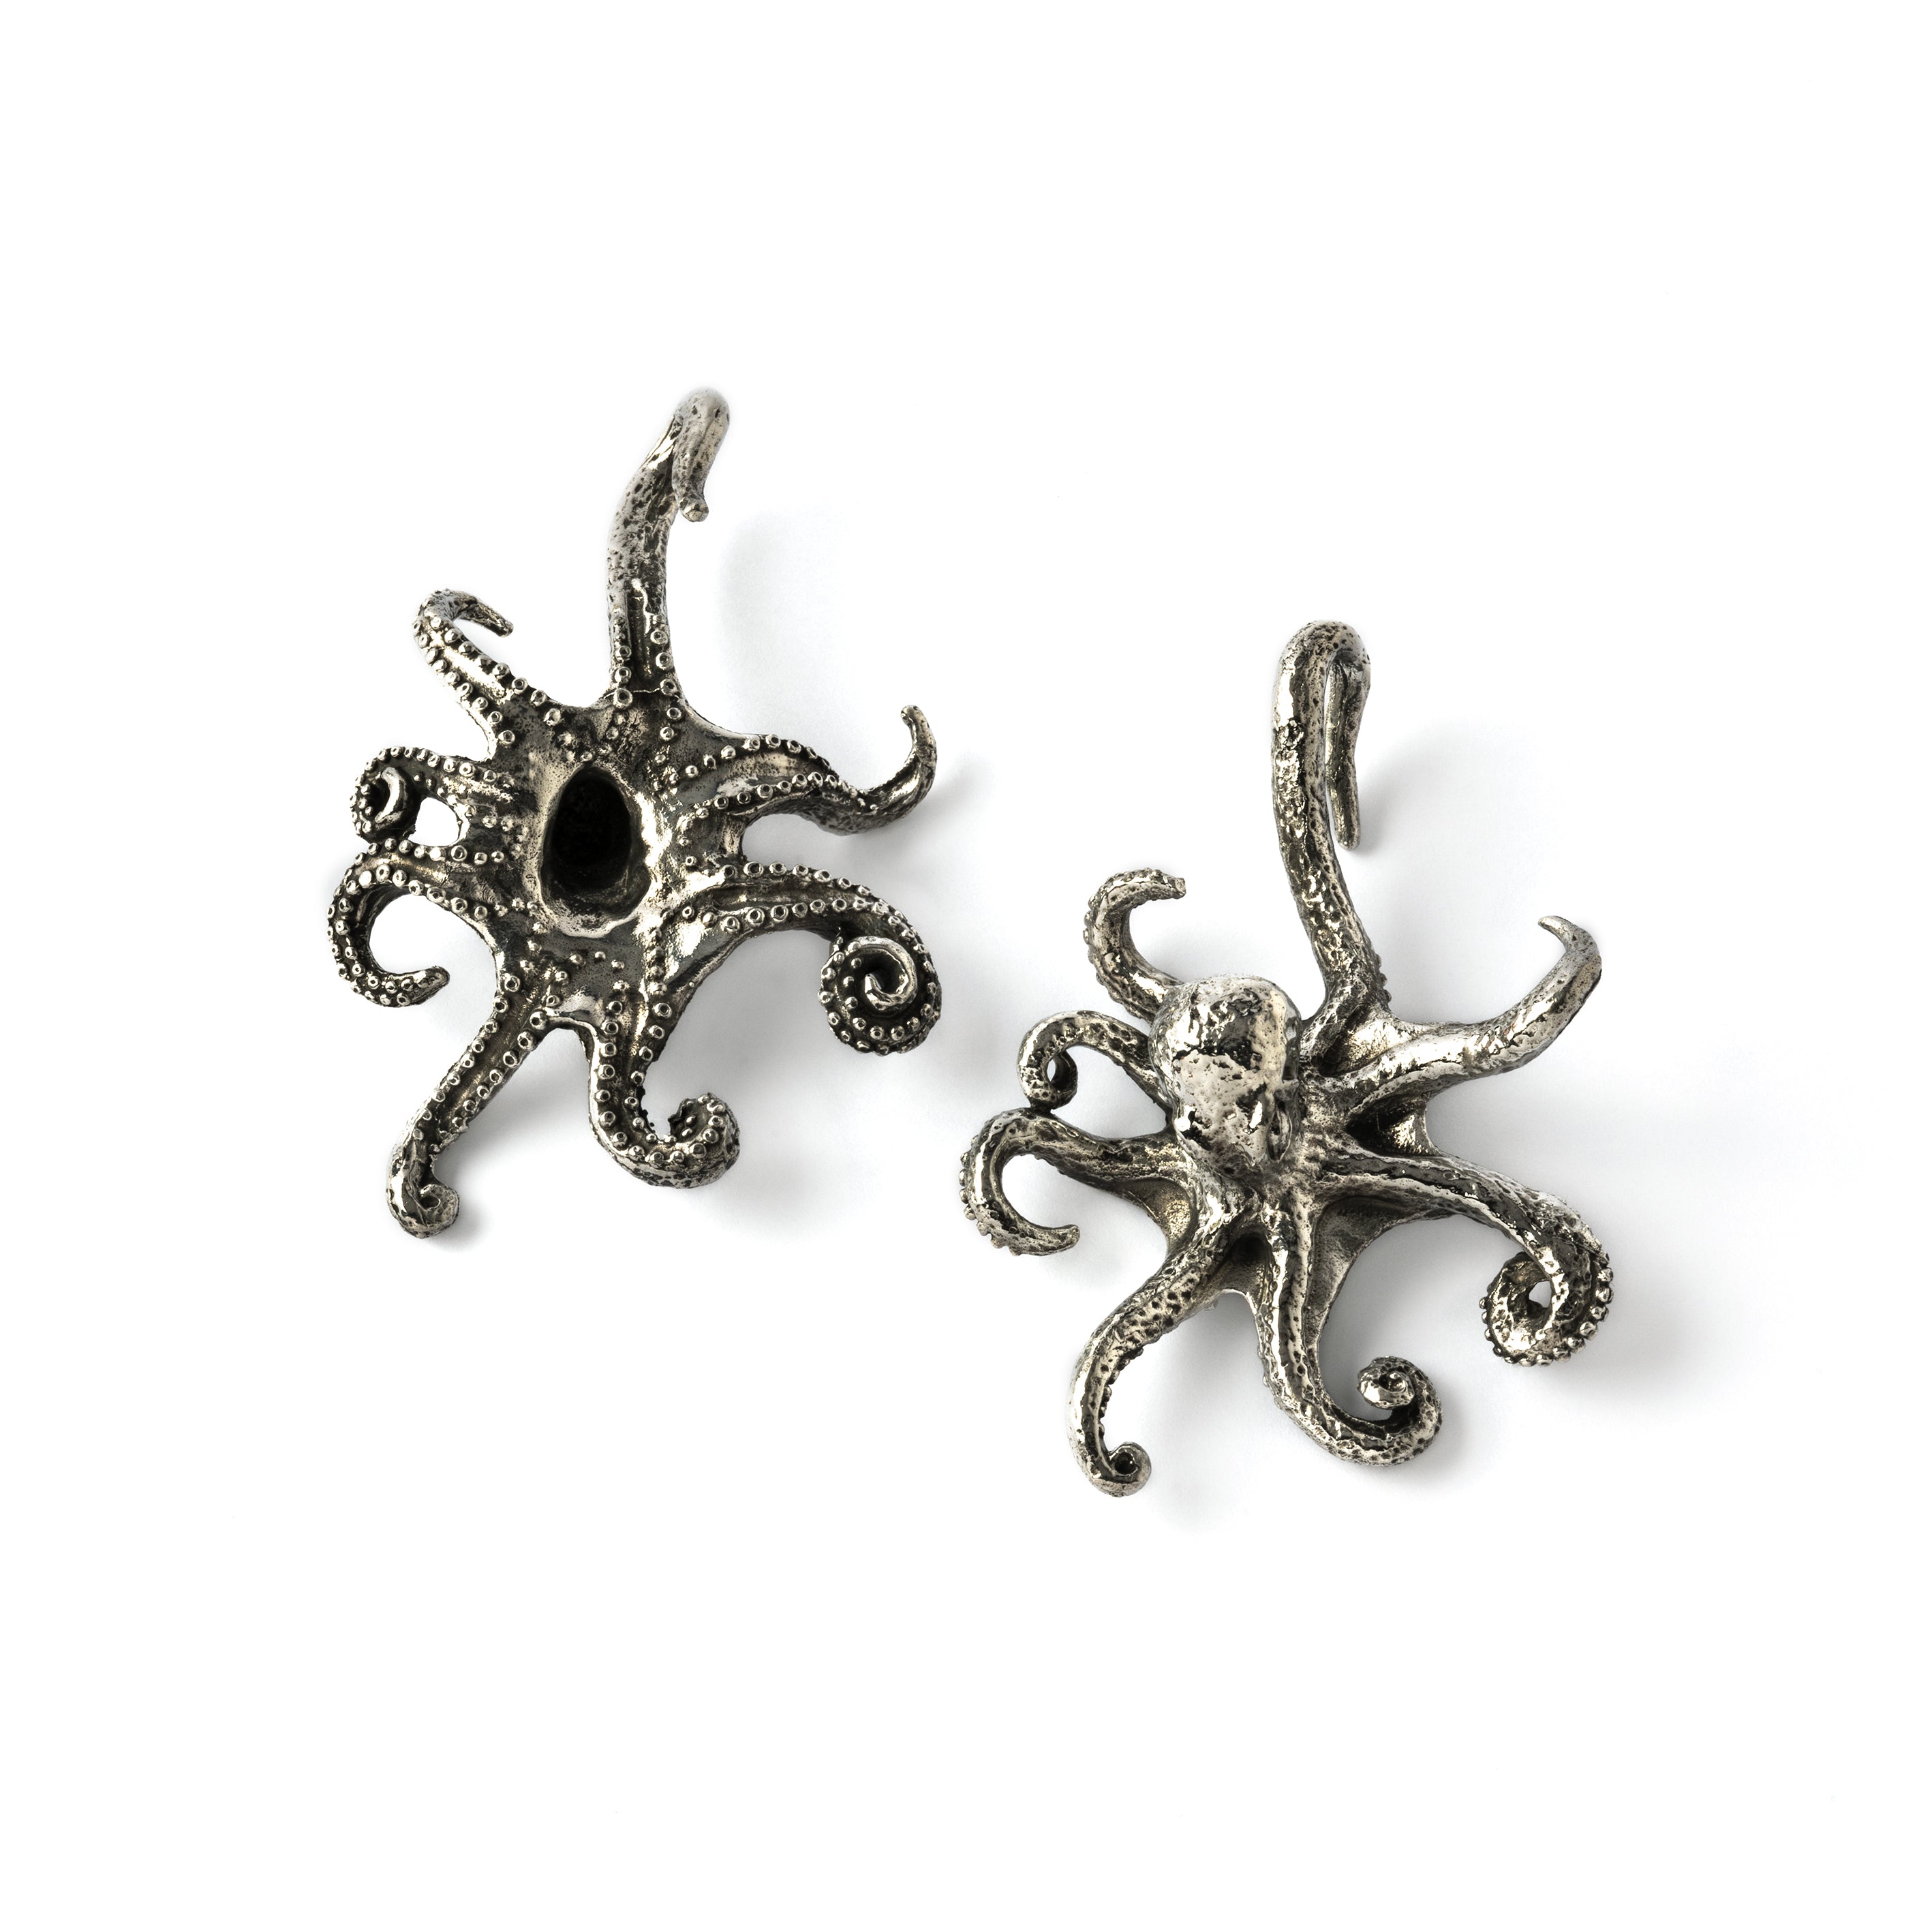 pair of silver brass Octopus ear weights hangers front and back view